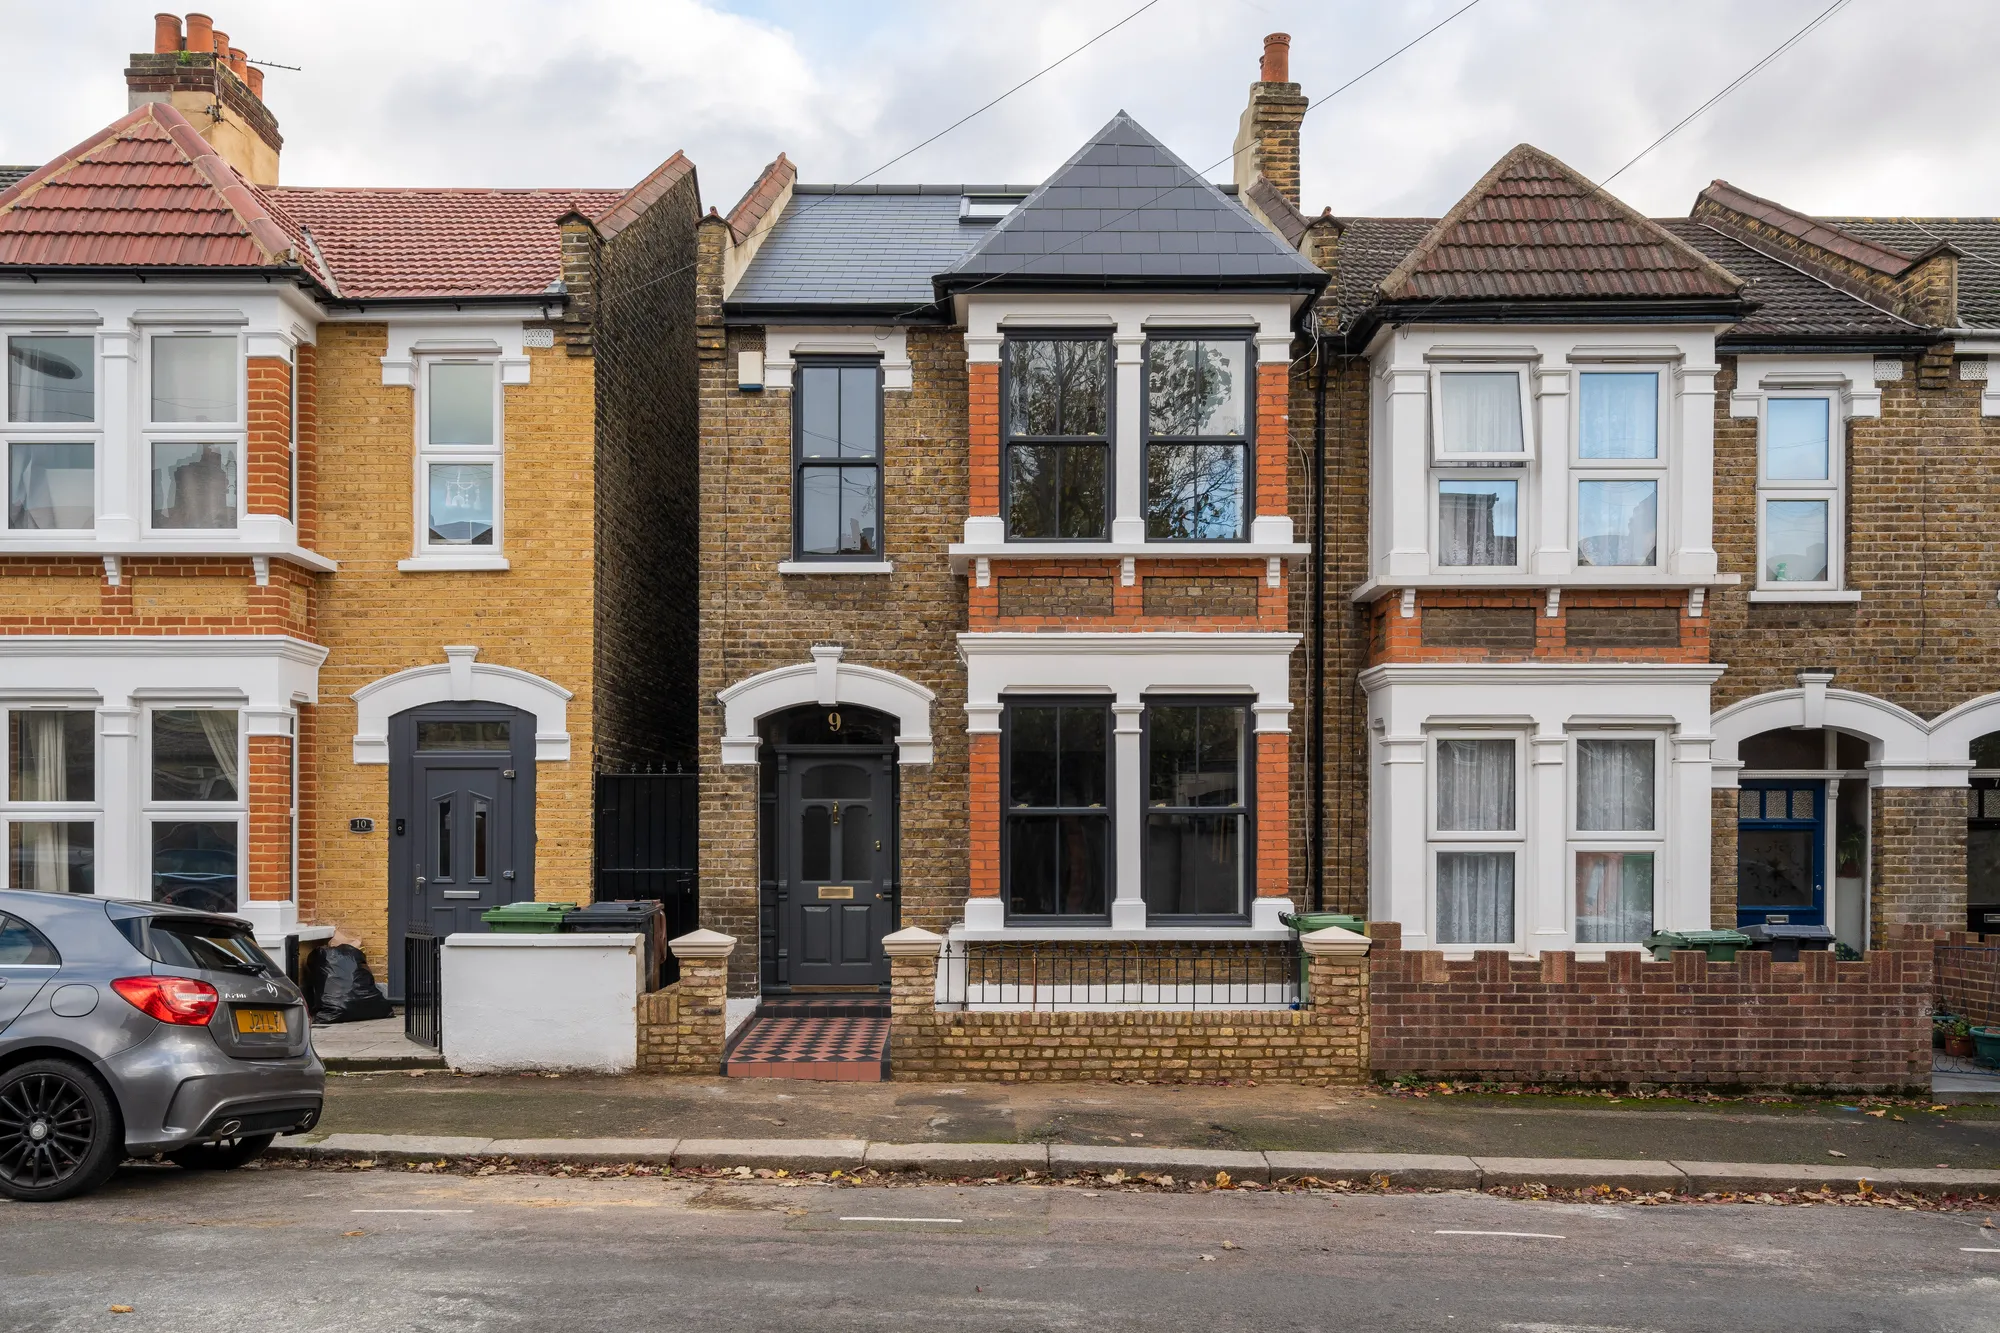 4 bed semi-detached house for sale in Goodman Road, Leyton - Property Image 1